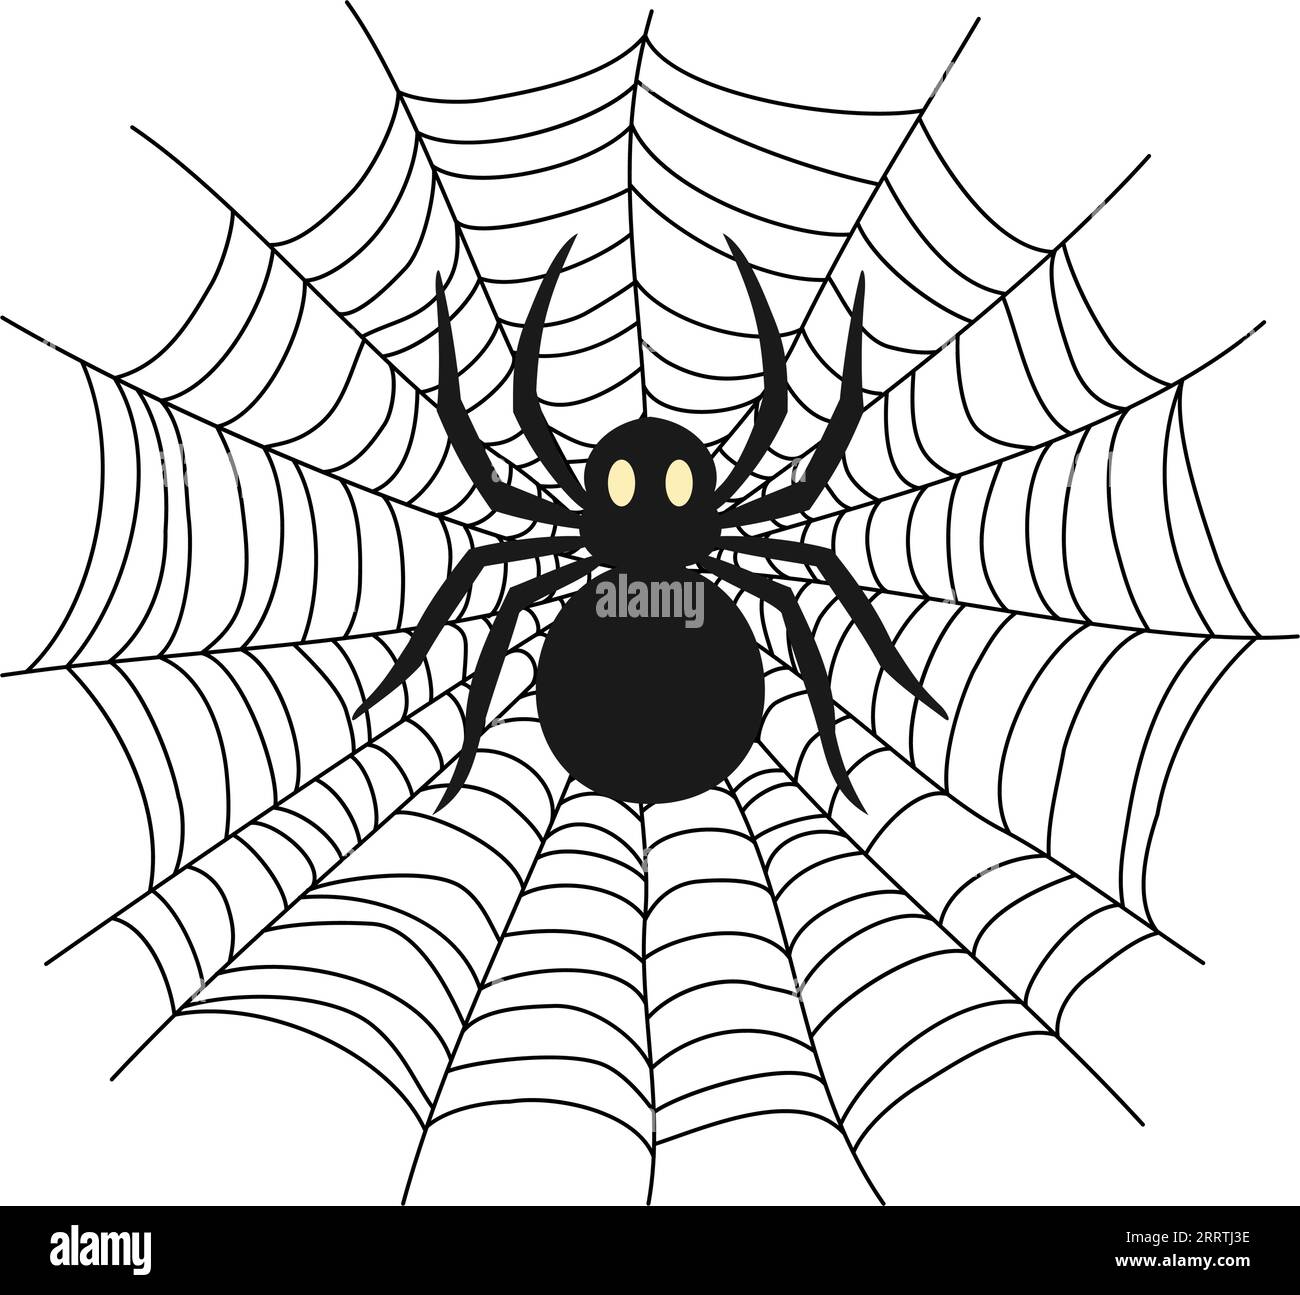 A black spider on a web. Texture of insect traps. Decor for Halloween celebration. Isolated graphic template. Vector illustration. Stock Vector